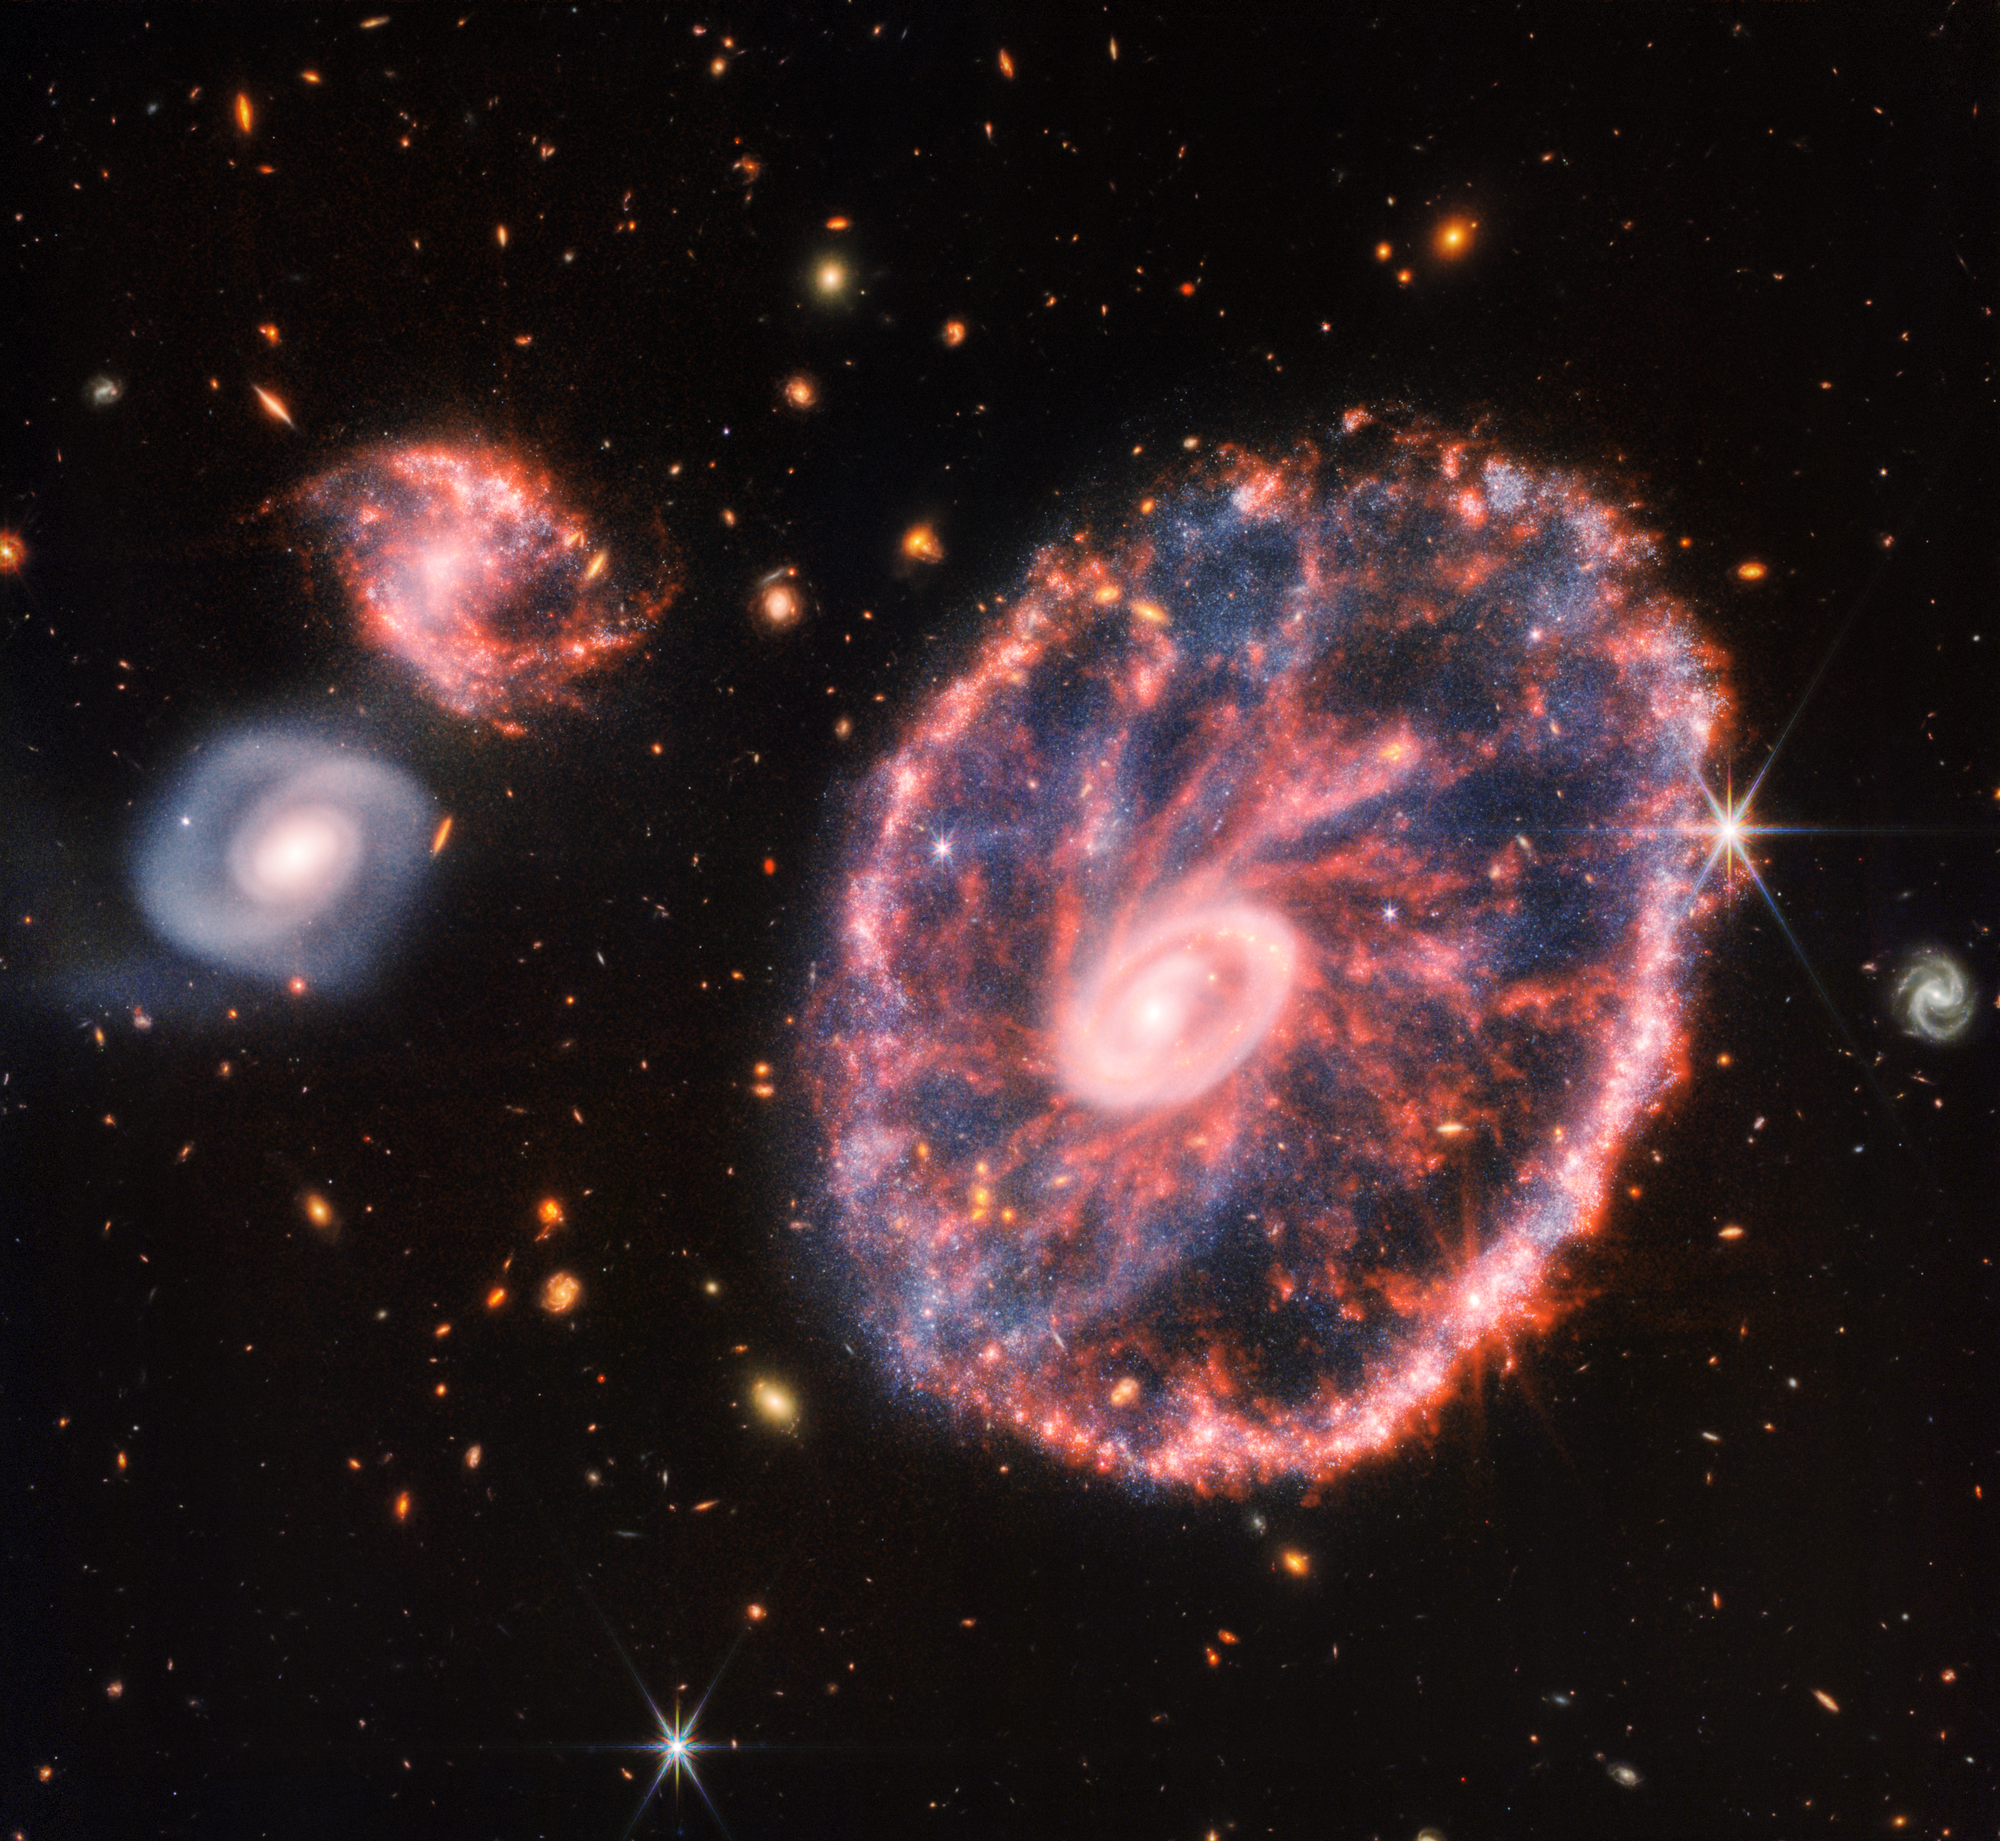 This galaxy formed as the result of a high-speed collision that occurred about 400 million years ago. The Cartwheel is composed of two rings, a bright inner ring and a colorful outer ring. Both rings expand outward from the center of the collision like shockwaves. However, despite the impact, much of the character of the large, spiral galaxy that existed before the collision remains, including its rotating arms. This leads to the “spokes” that inspired the name of the Cartwheel Galaxy, which are the bright red streaks seen between the inner and outer rings. These brilliant red hues, located not only throughout the Cartwheel, but also the companion spiral galaxy at the top left, are caused by glowing, hydrocarbon-rich dust. In this near- and mid-infrared composite image, MIRI data are colored red while NIRCam data are colored blue, orange, and yellow. Amidst the red swirls of dust, there are many individual blue dots, which represent individual stars or pockets of star formation. NIRCam also defines the difference between the older star populations and dense dust in the core and the younger star populations outside of it.